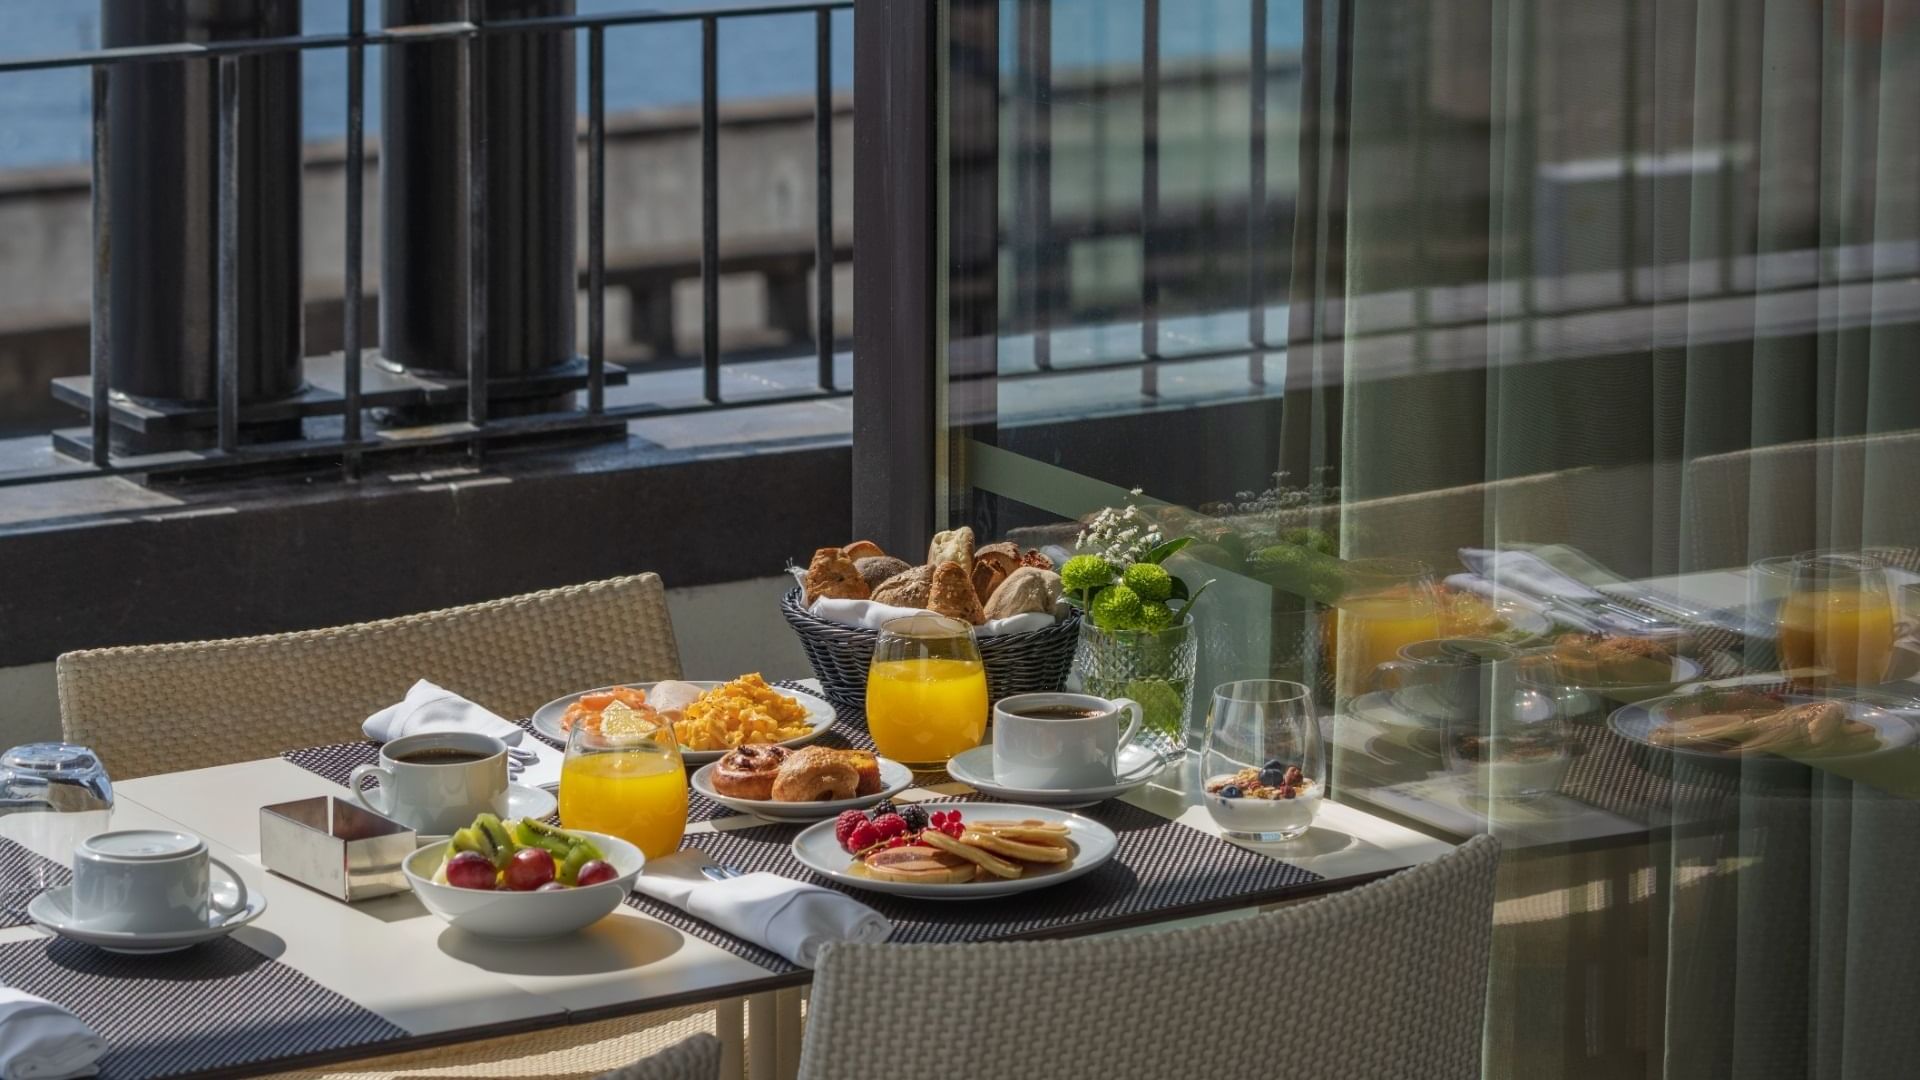 Breakfast served on a dining table in Balcony Restaurant at Grand Hotel Açores Atlântico